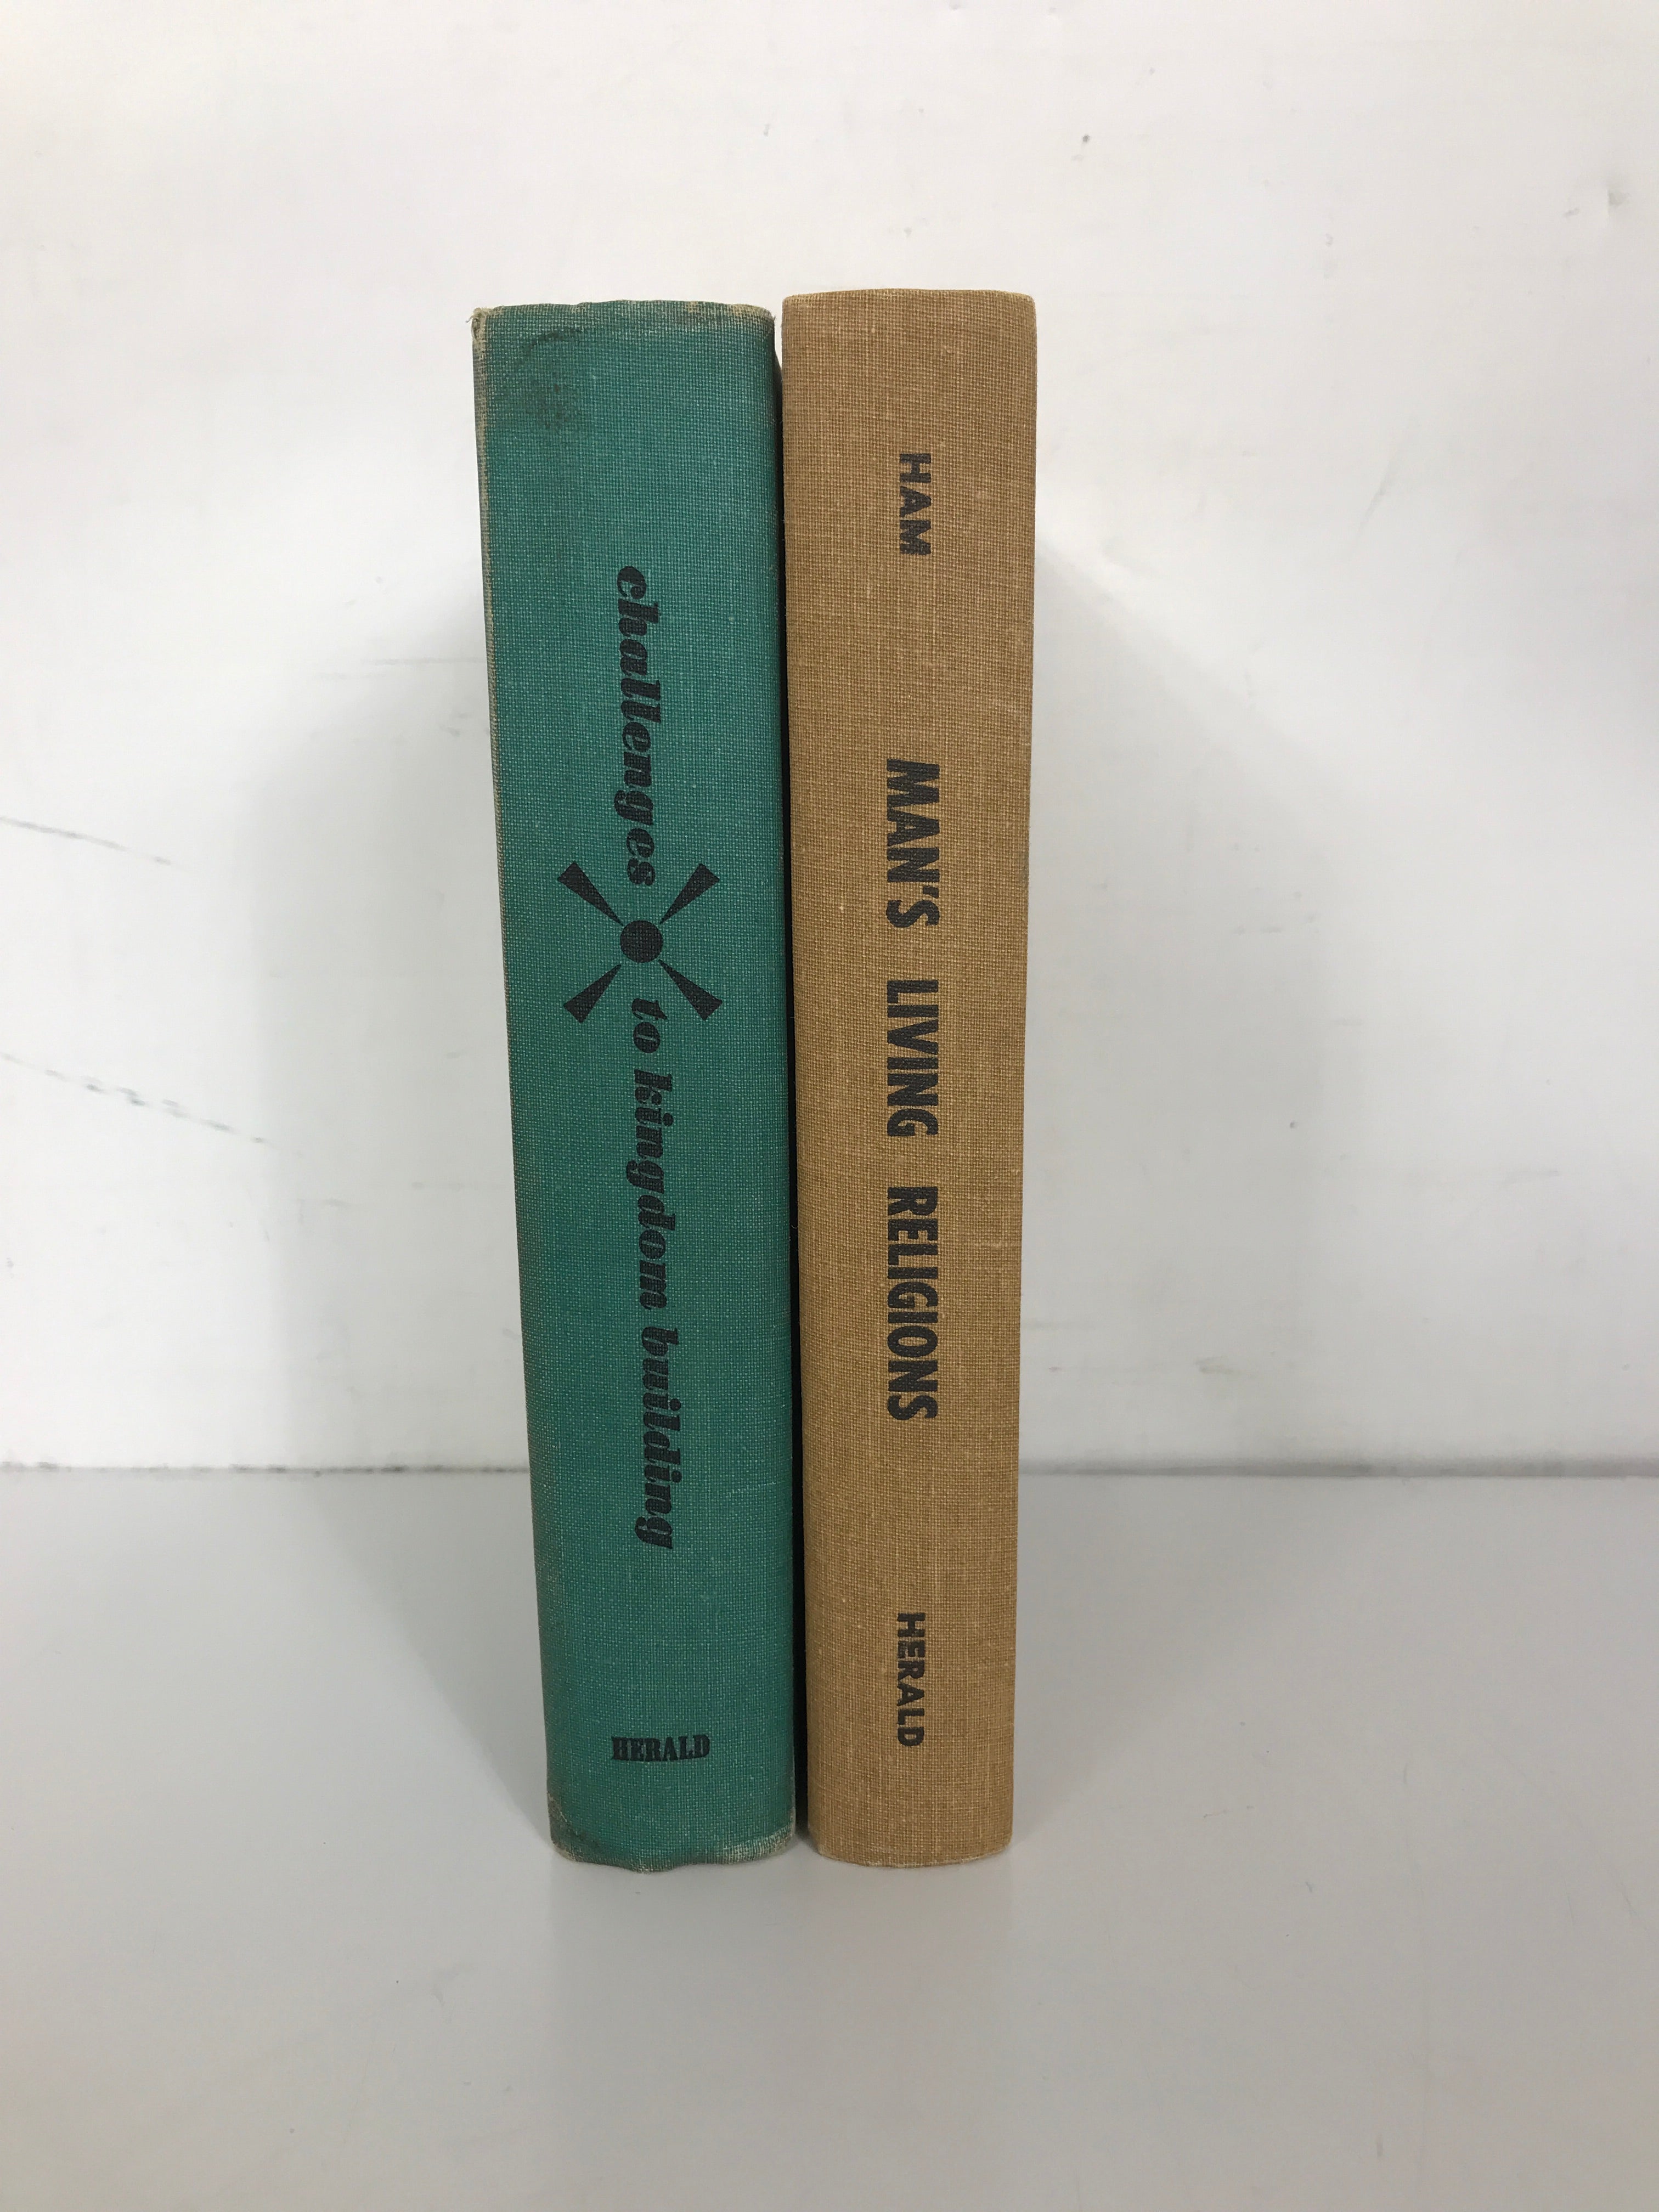 2 RLDS Books: Challenges to Kingdom Building/Man's Living Religions 1966-1968 HC